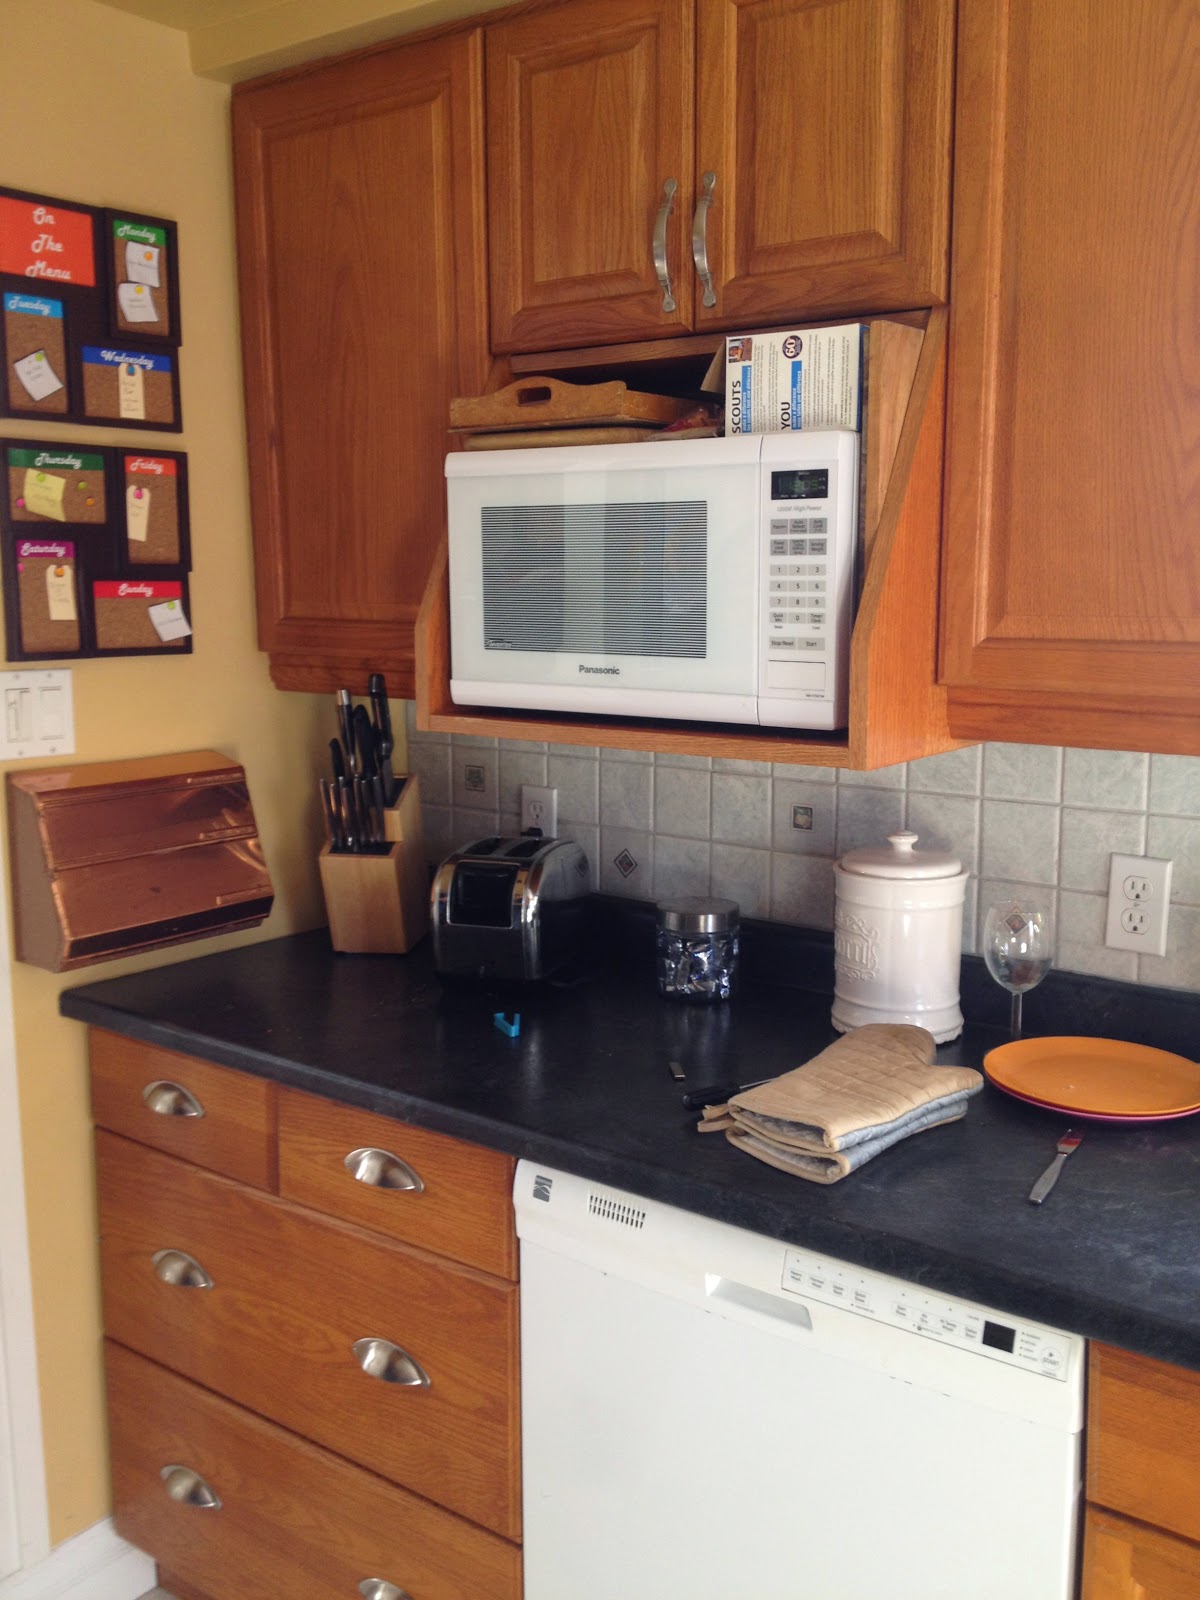 How to Cut a Cabinet for Over the Range Microwave (Our 